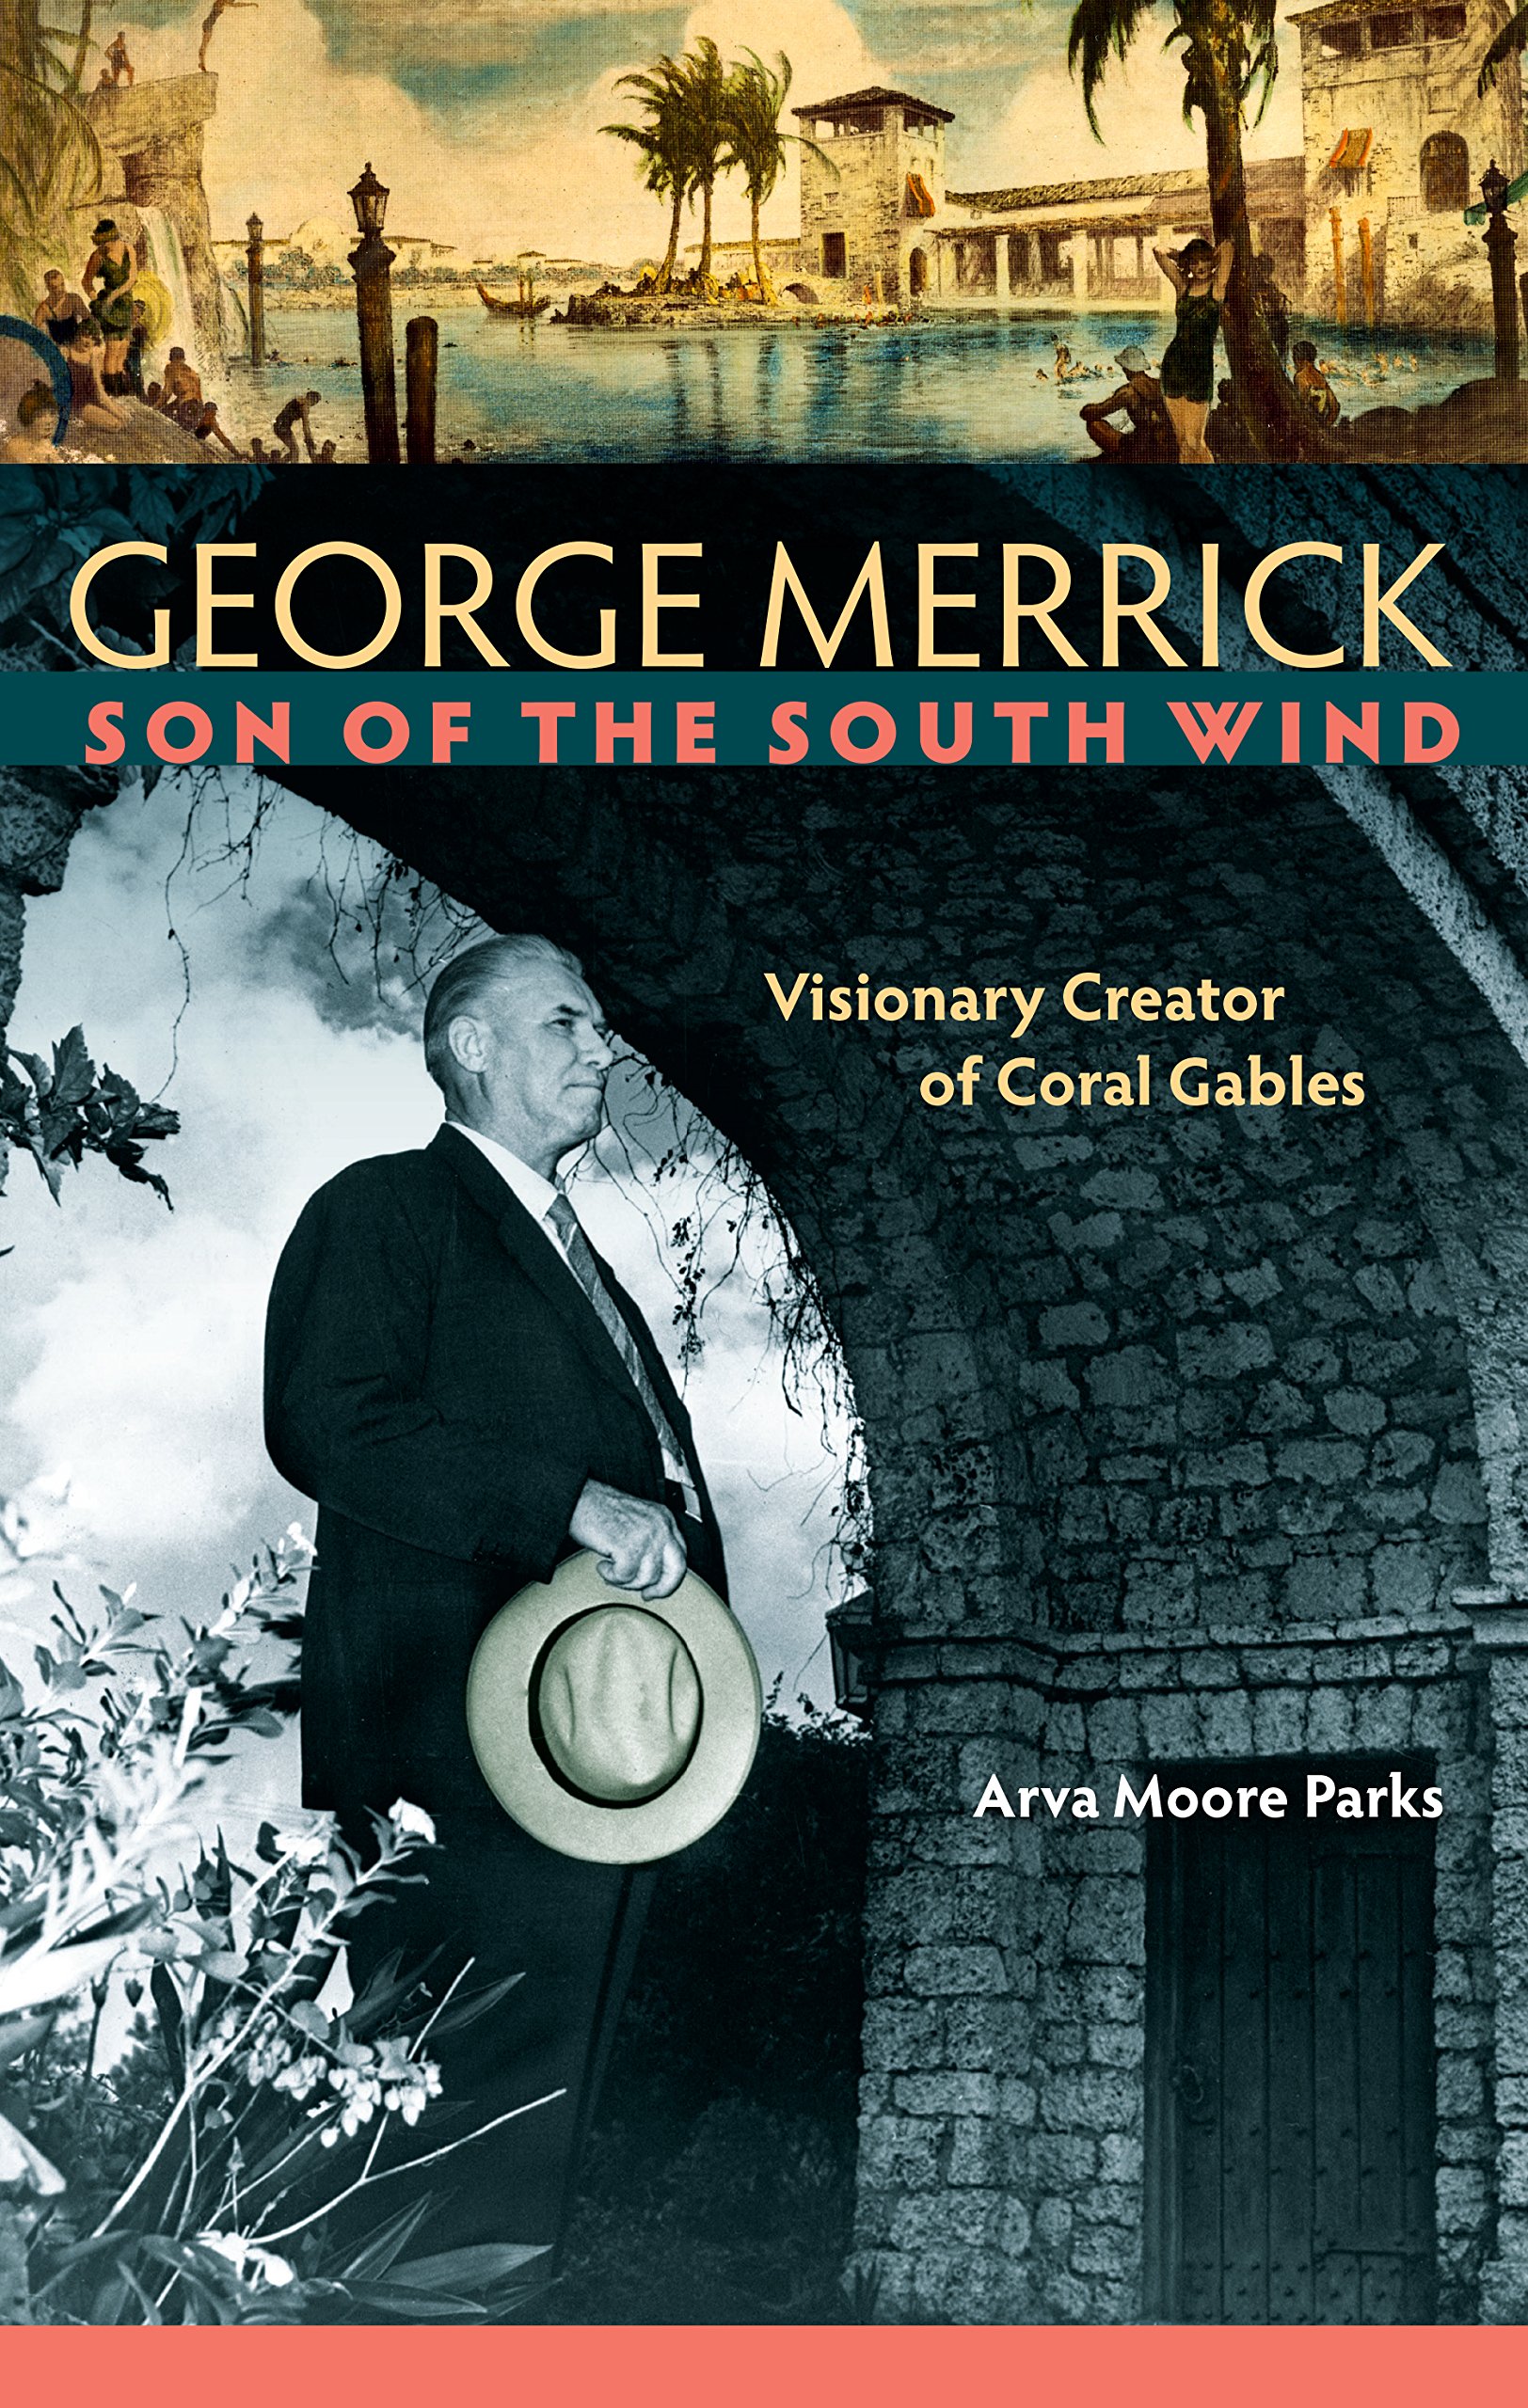 George Merrick, Son of the South Wind: Visionary Creator of Coral Gables book cover